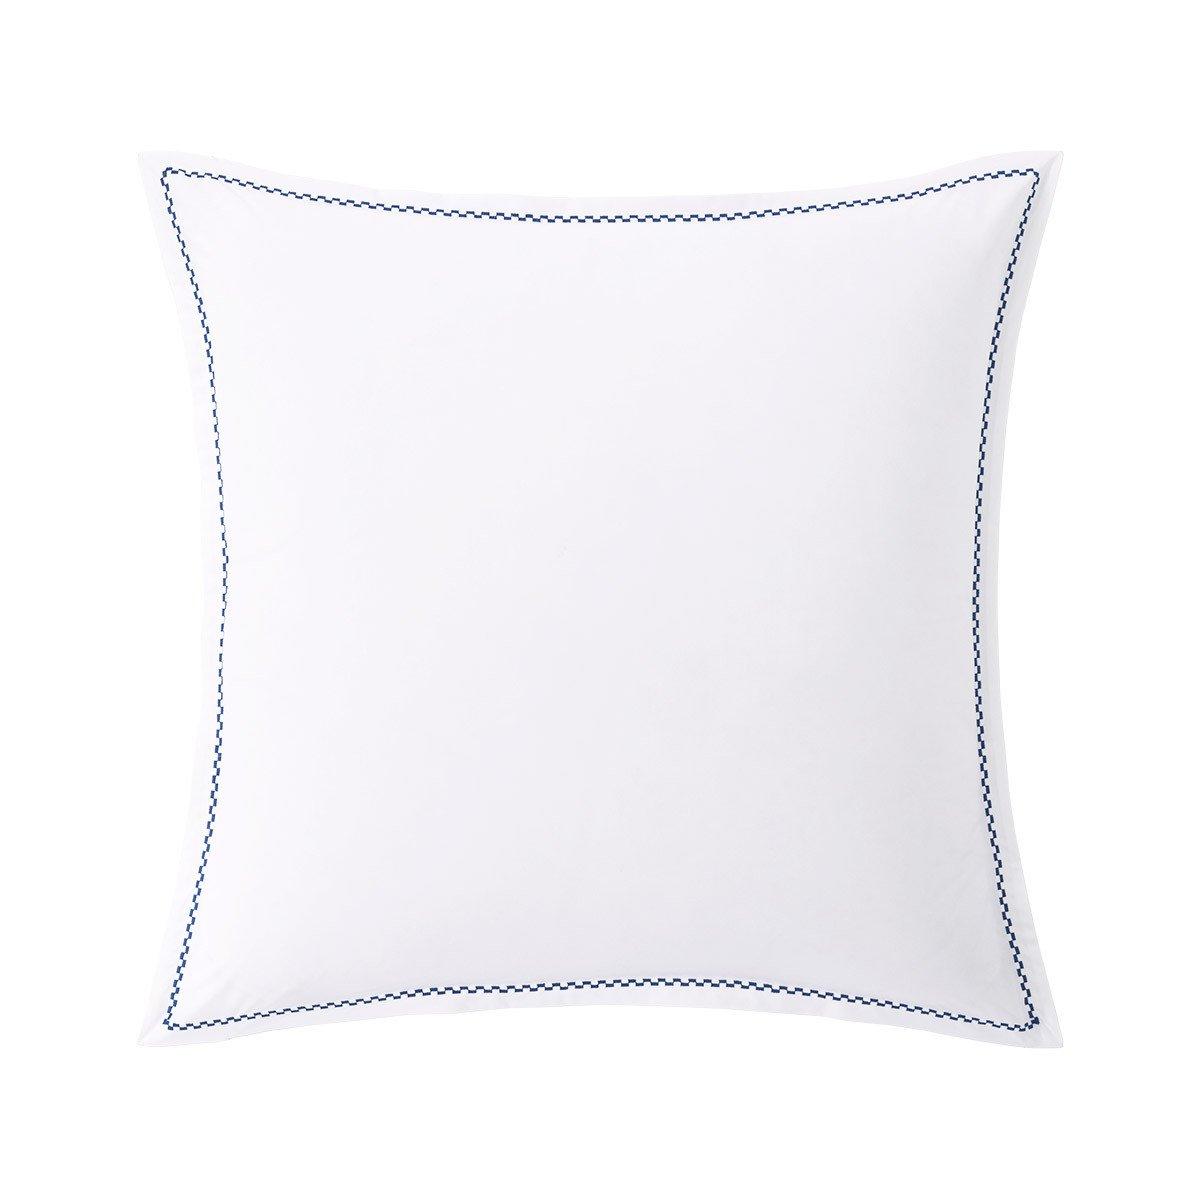 Fig Linens - Alienor Outremer Bedding by Yves Delorme - Euro Sham